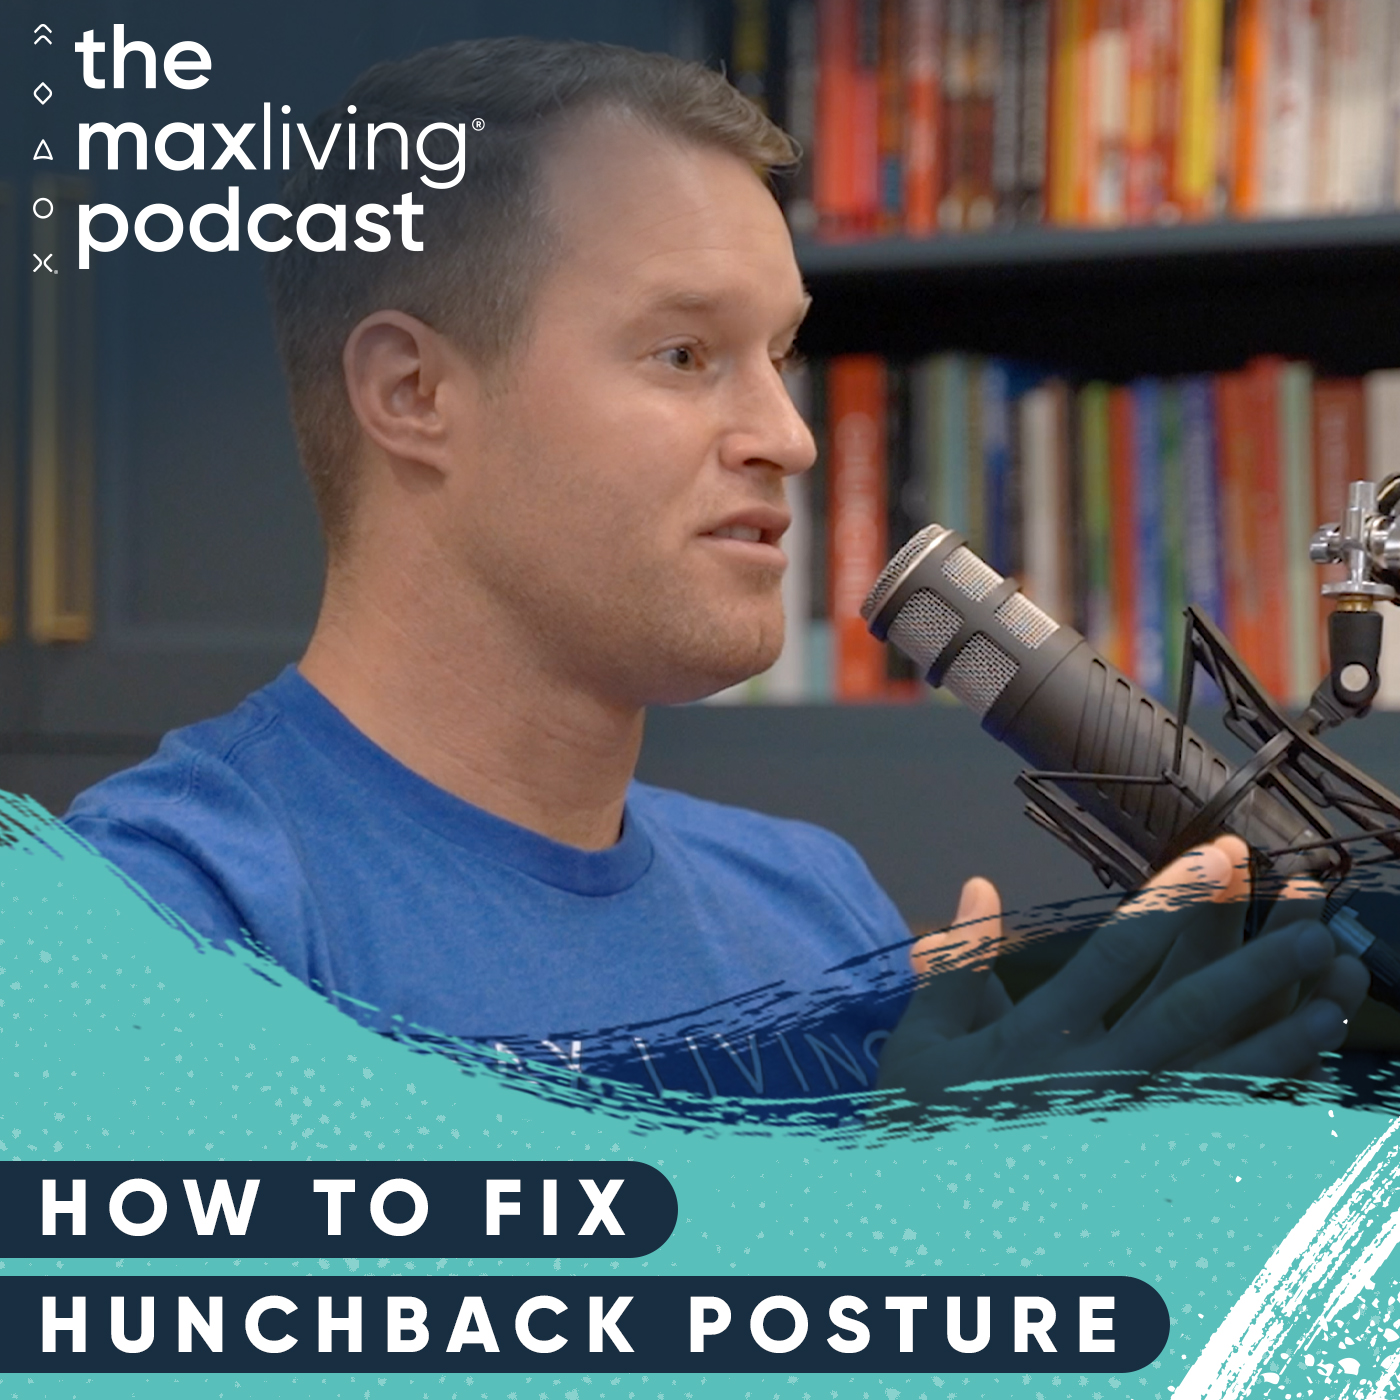 Episode 42 - How to Fix Hunchback Posture